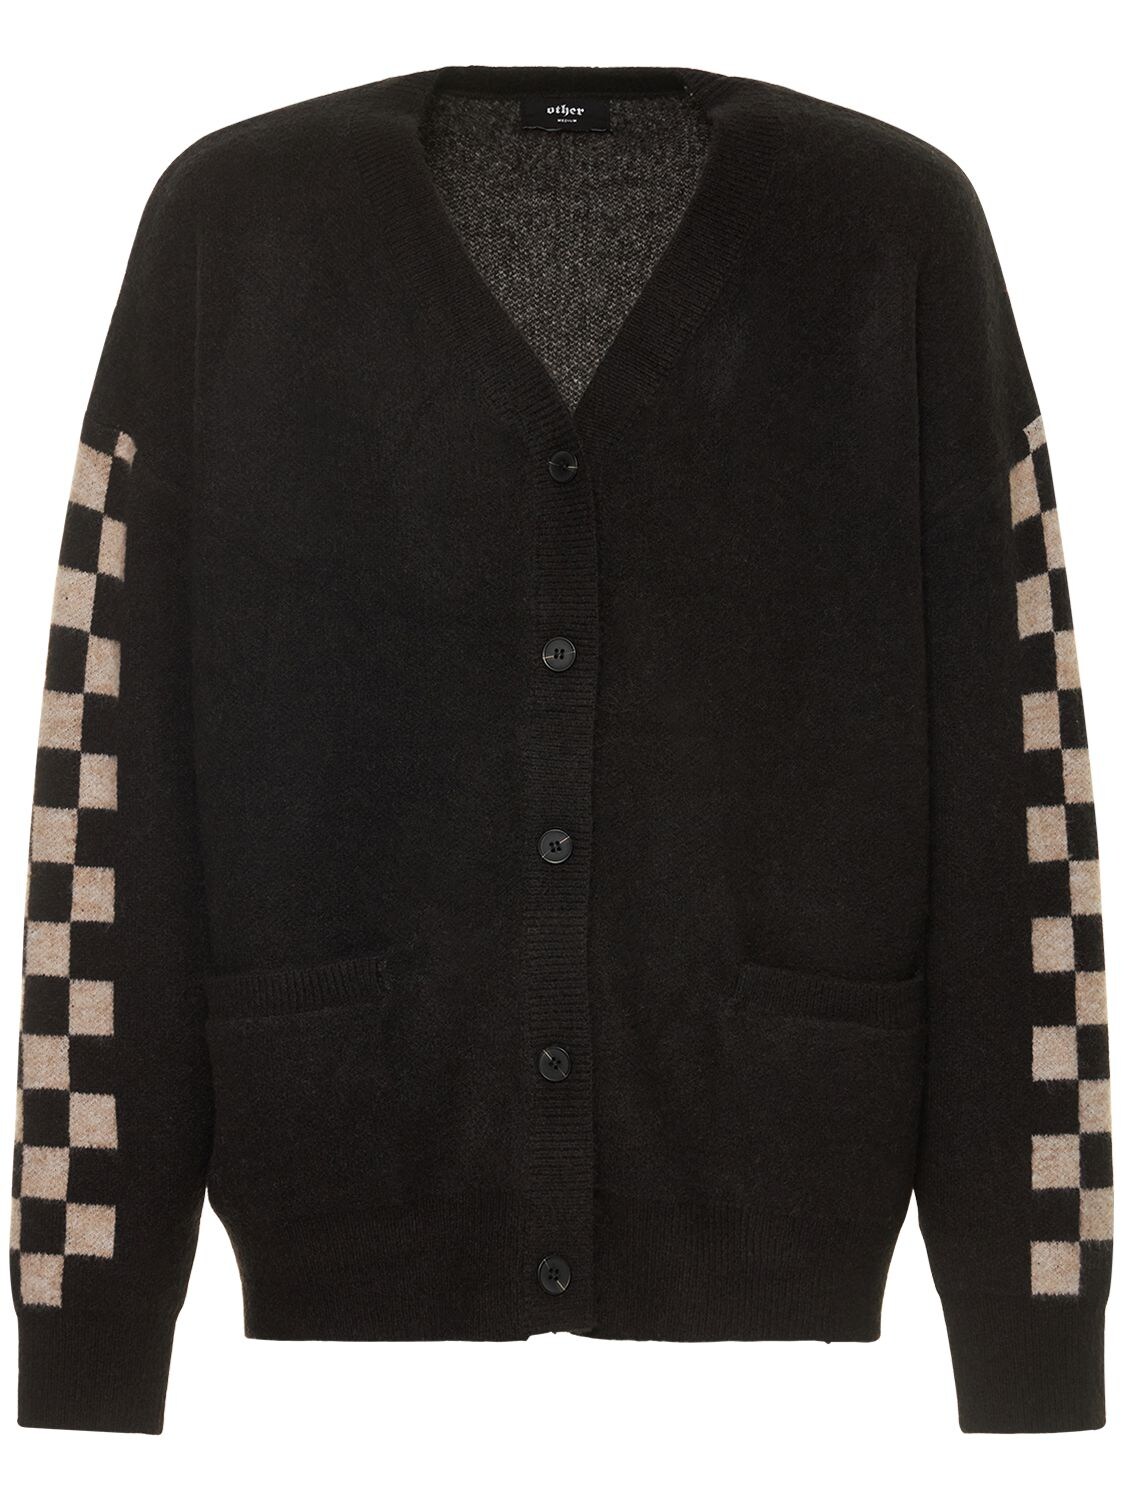 Other Race Way Knitted Cardigan In Black